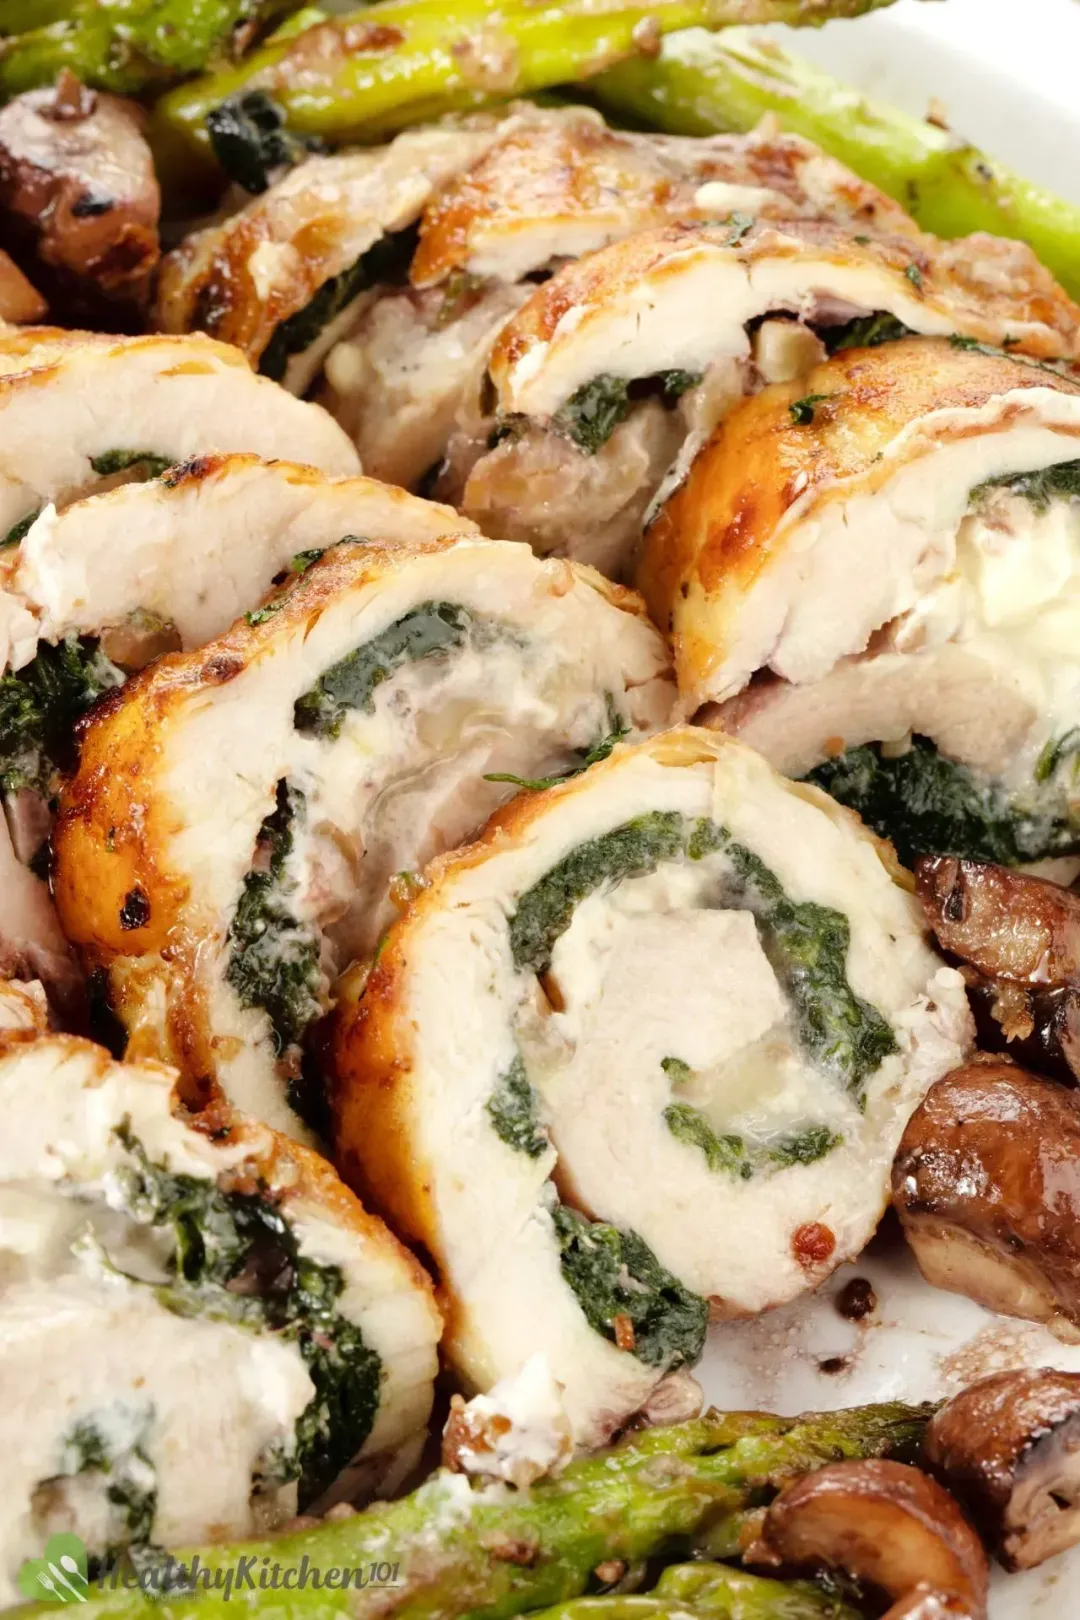 A close-up shot of chicken rolls stuffed with spinach and laid near asparagus.